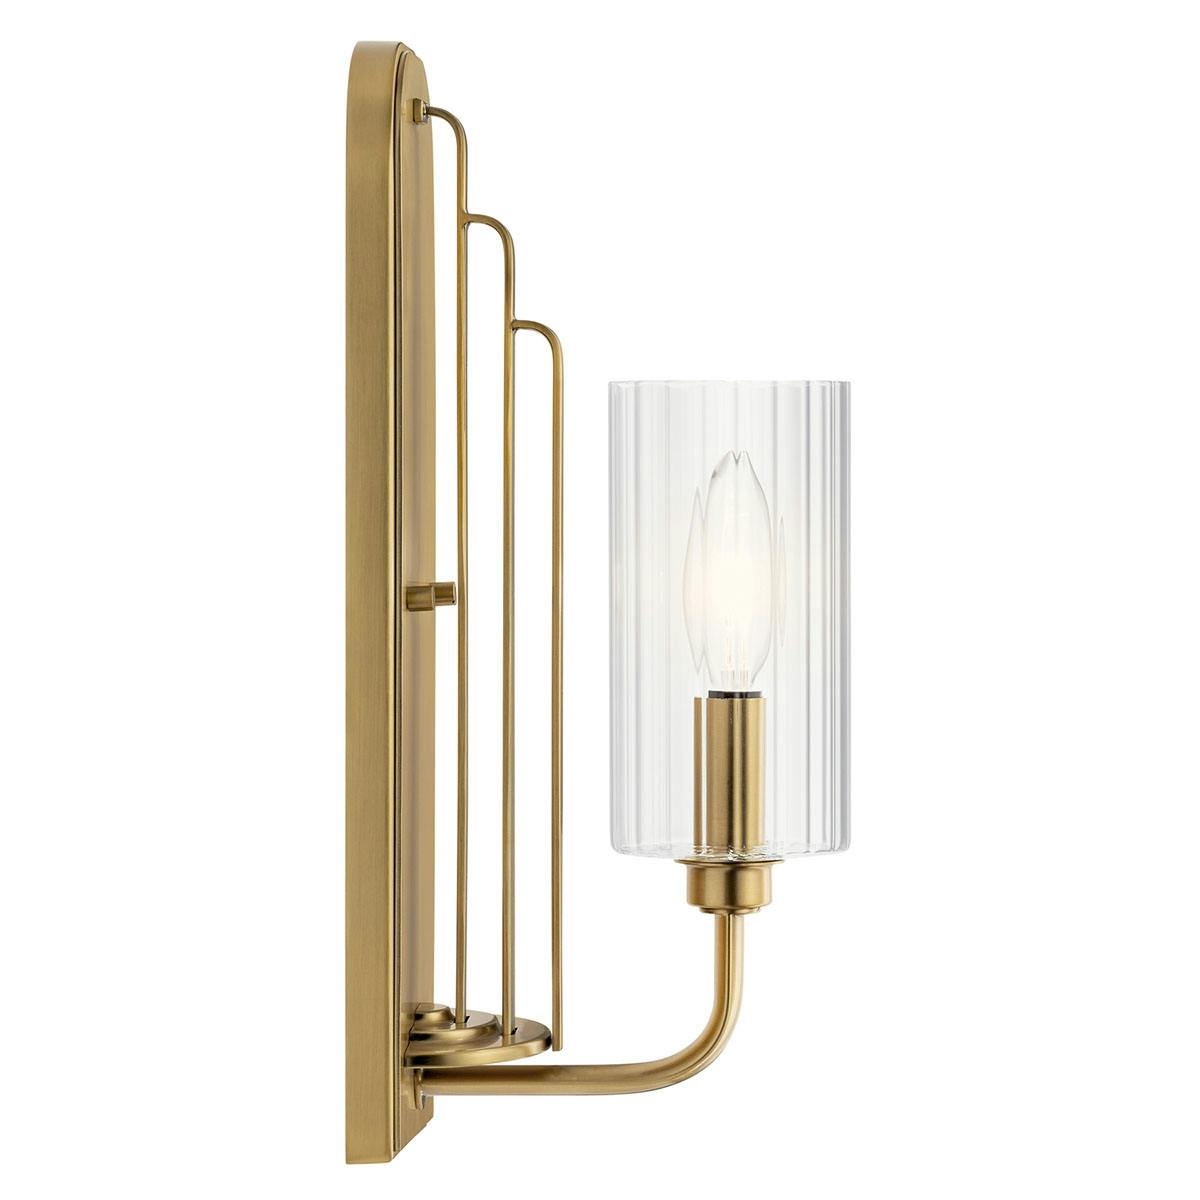 Profile view of the Kimrose 1 Light Sconce Brass finish on a white background